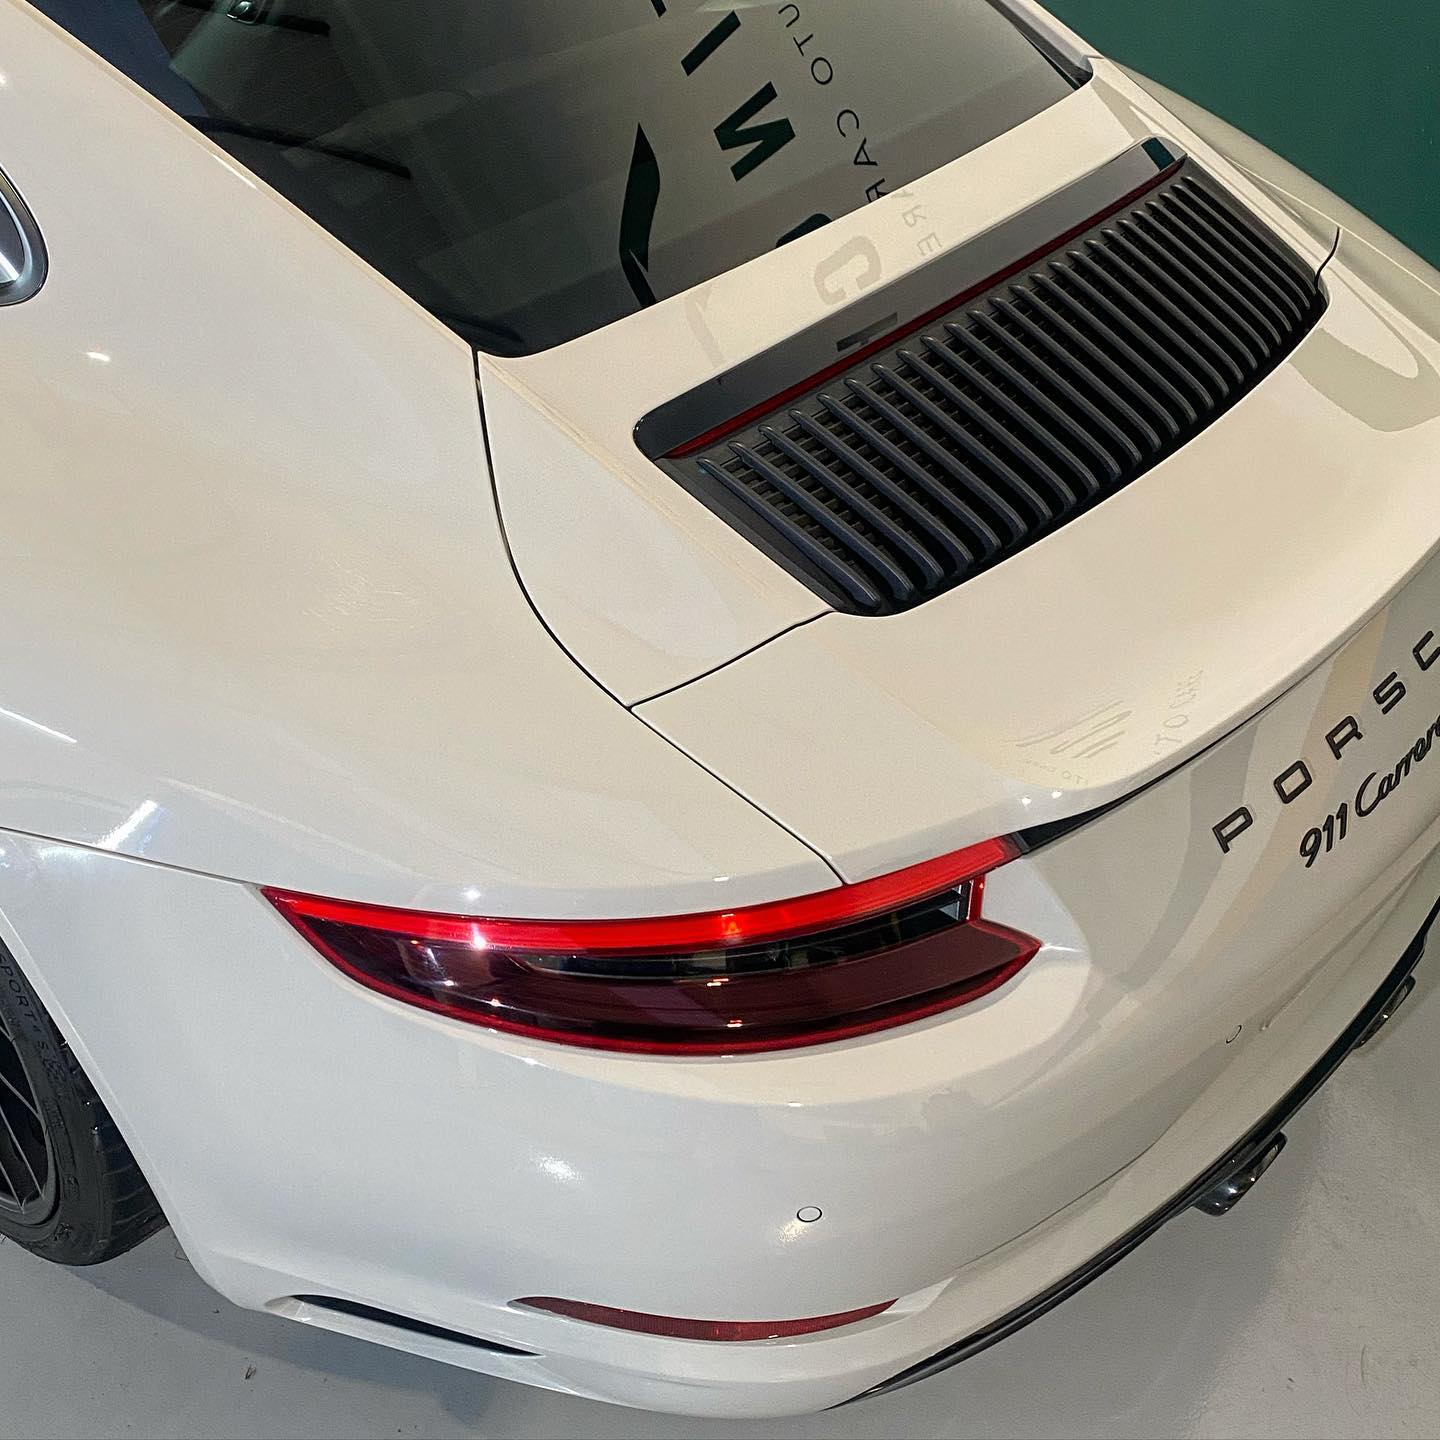 Rear view of a white porsche 911 carrera showing the taillights and model designation.